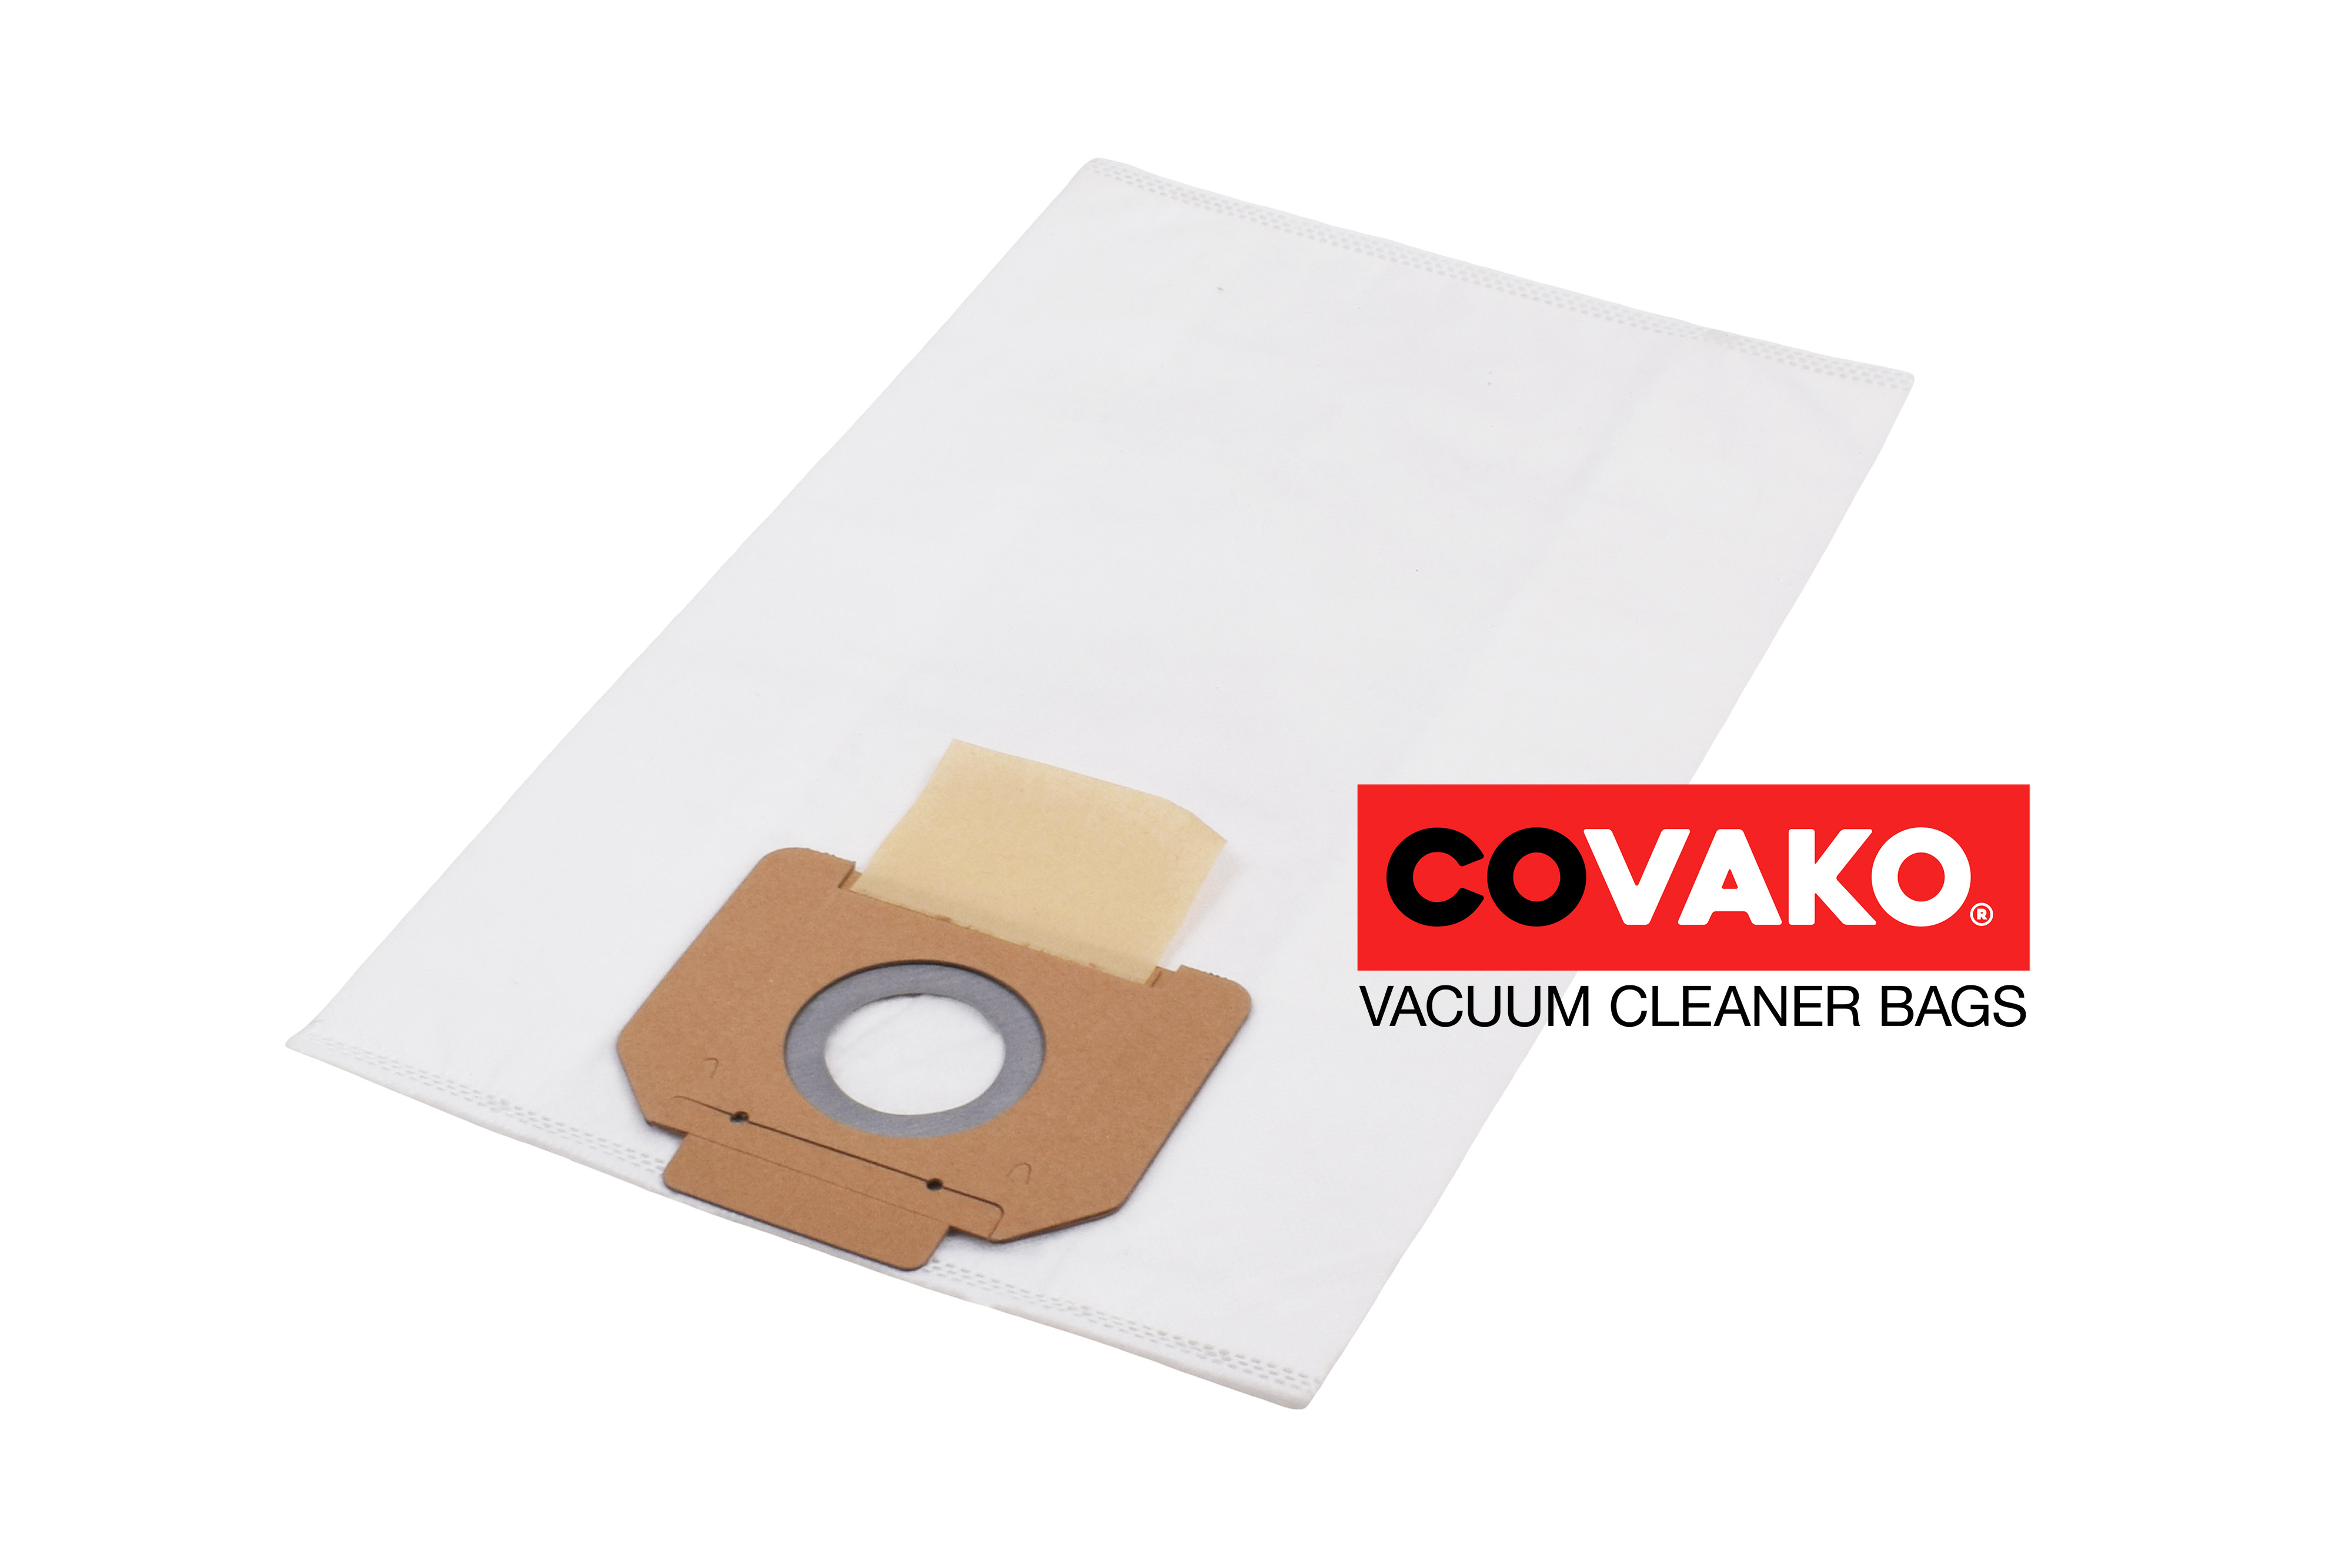 DiBo Windly 515 TC / Synthesis - DiBo vacuum cleaner bags